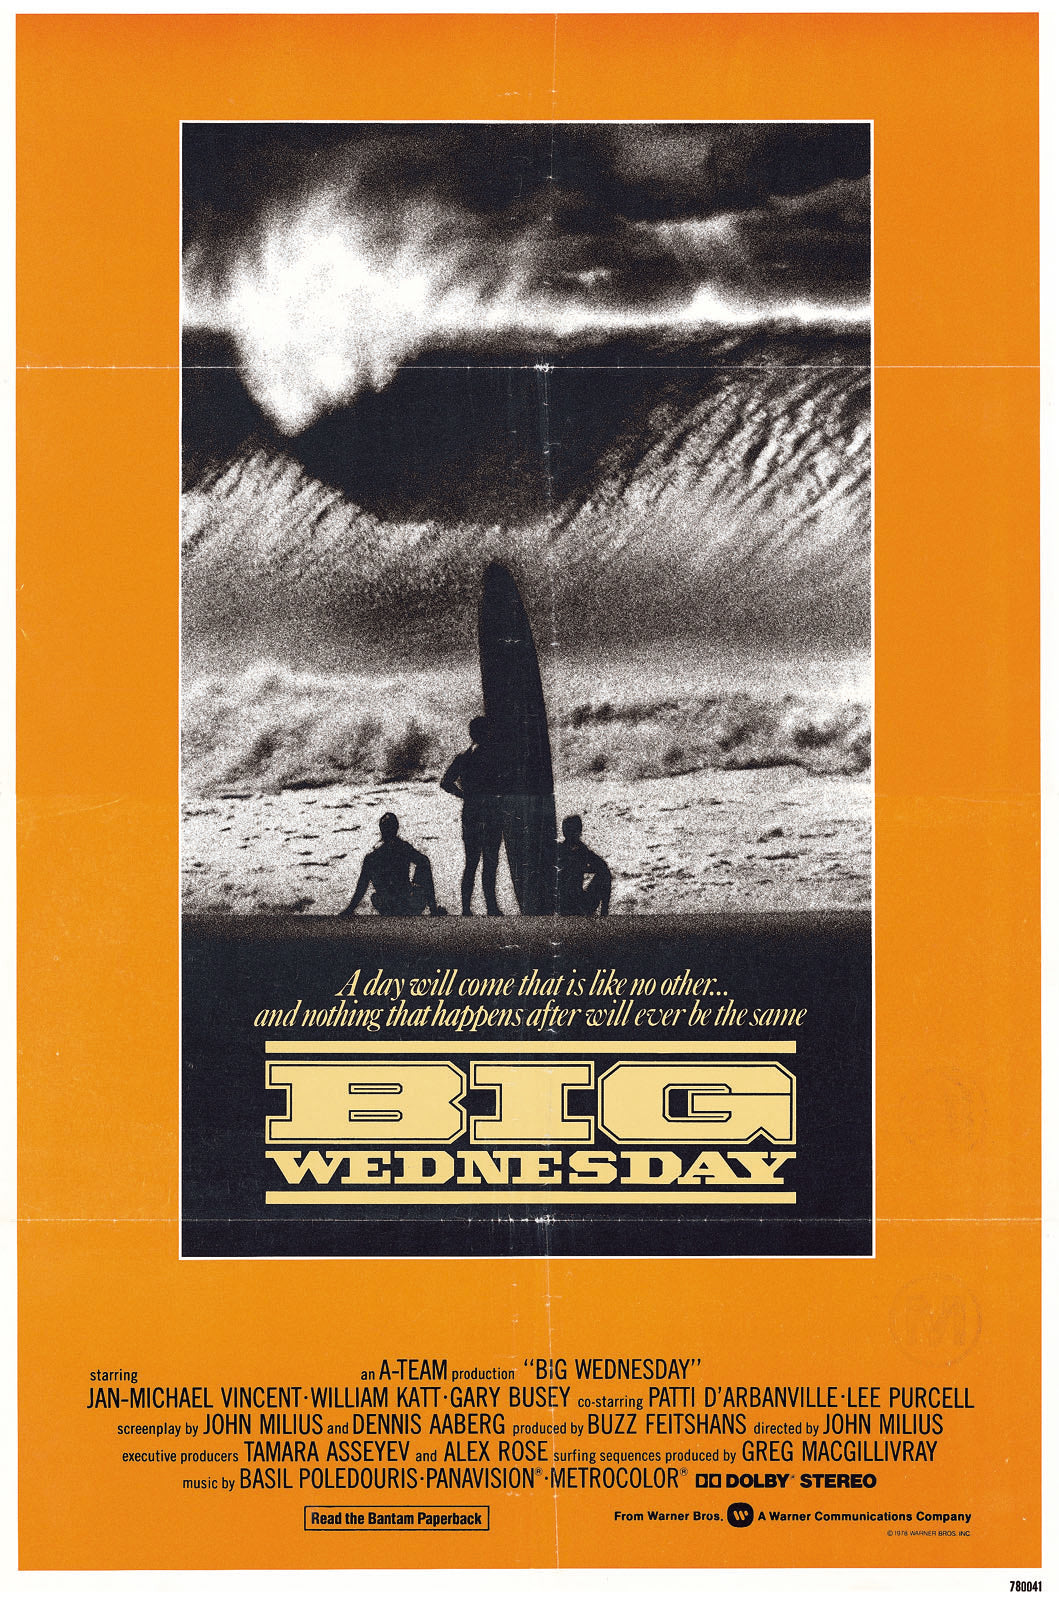 Big Wednesday. 1978.  Much sought after cult movie by John Milius and this is the hard-to-find U.S. one-sheet poster. It has some areas of fading and several creases along the fold lines but still presents well.  The asking price reflects these flaws.  Approx 700mm x 1000mm. (not poster shown)